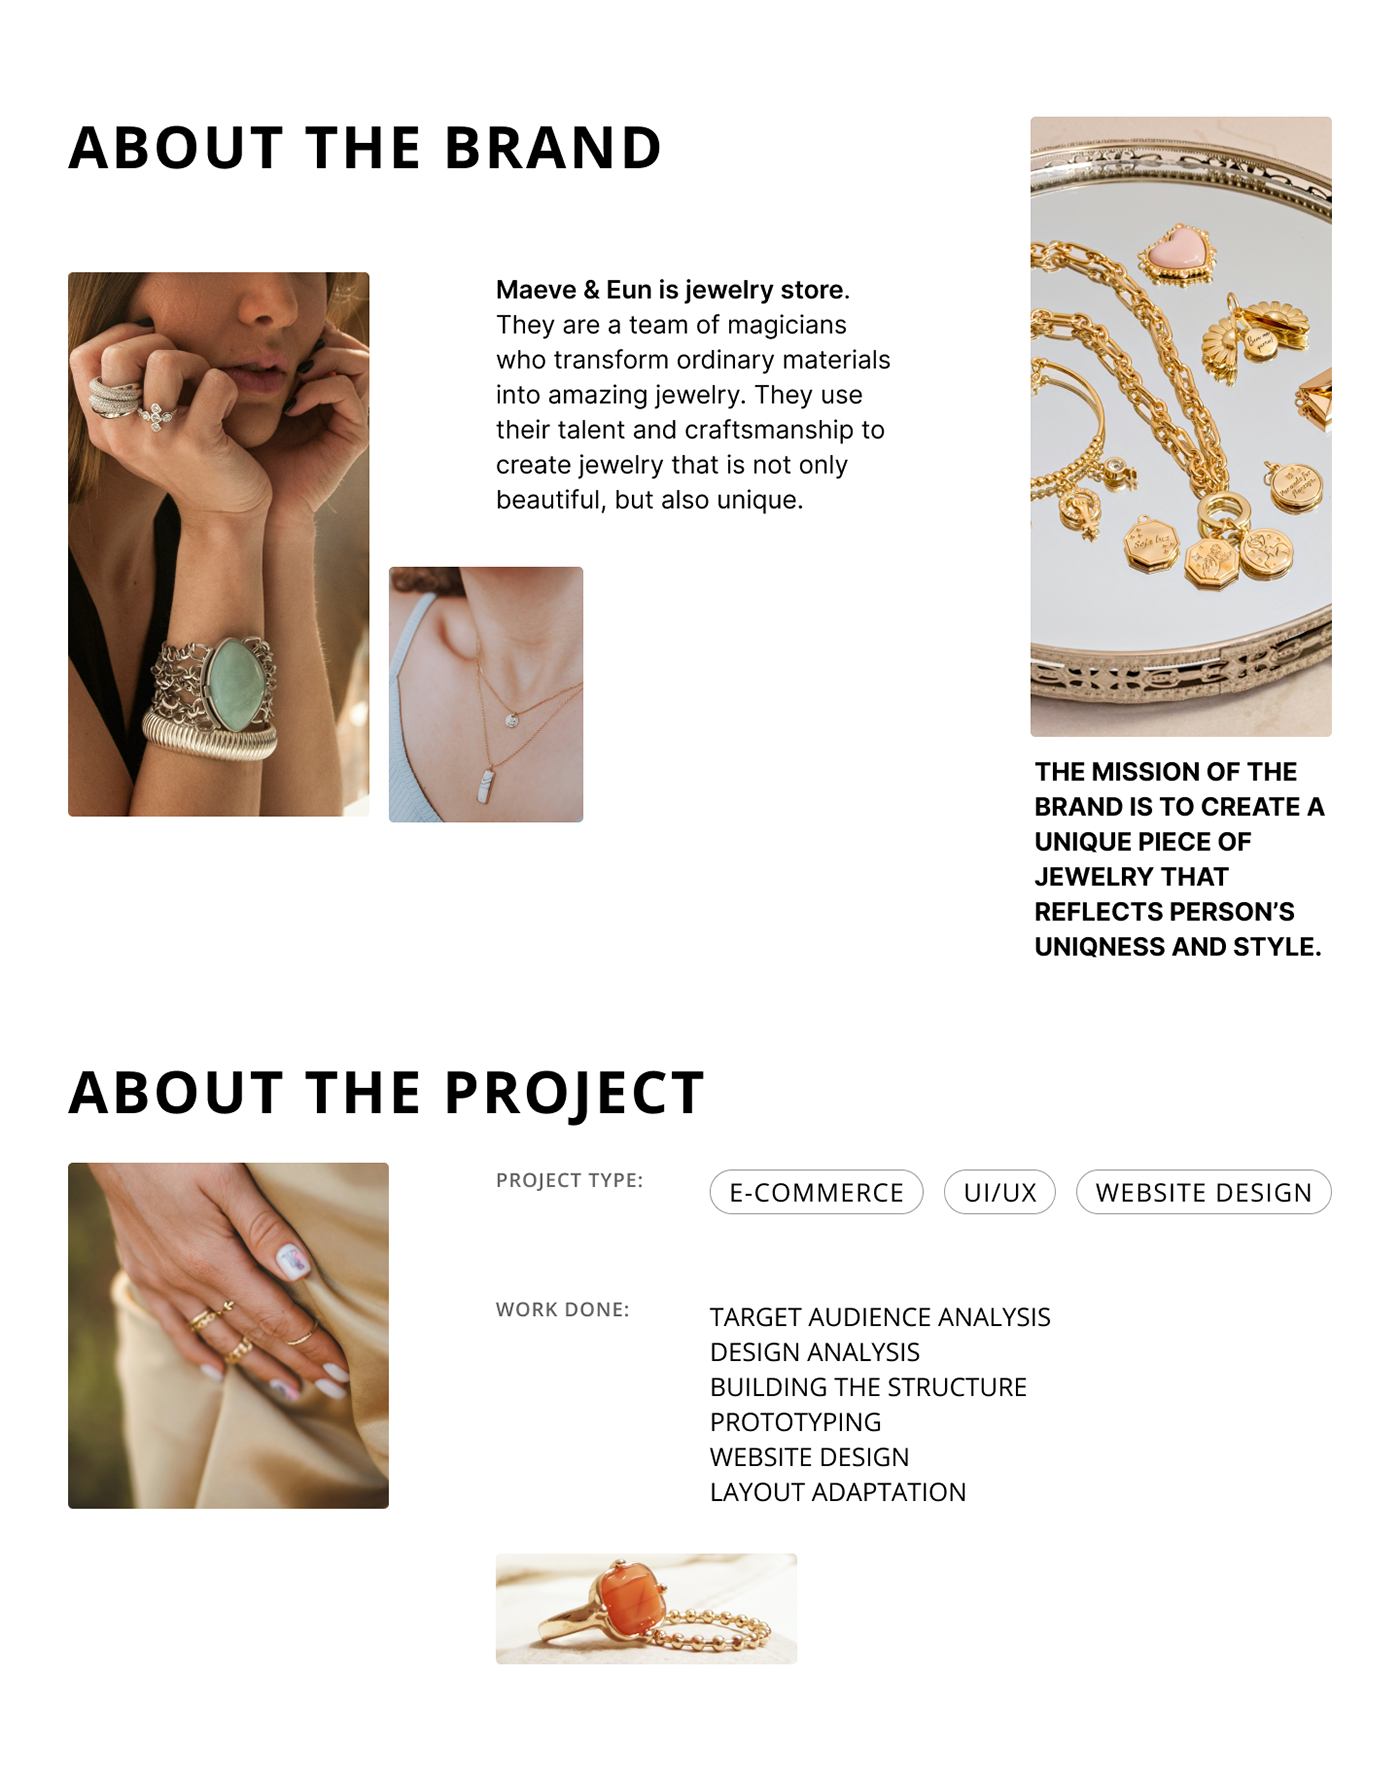 The mission of the brand is to create a unique piece of jewelry that reflects person’s uniqness and 